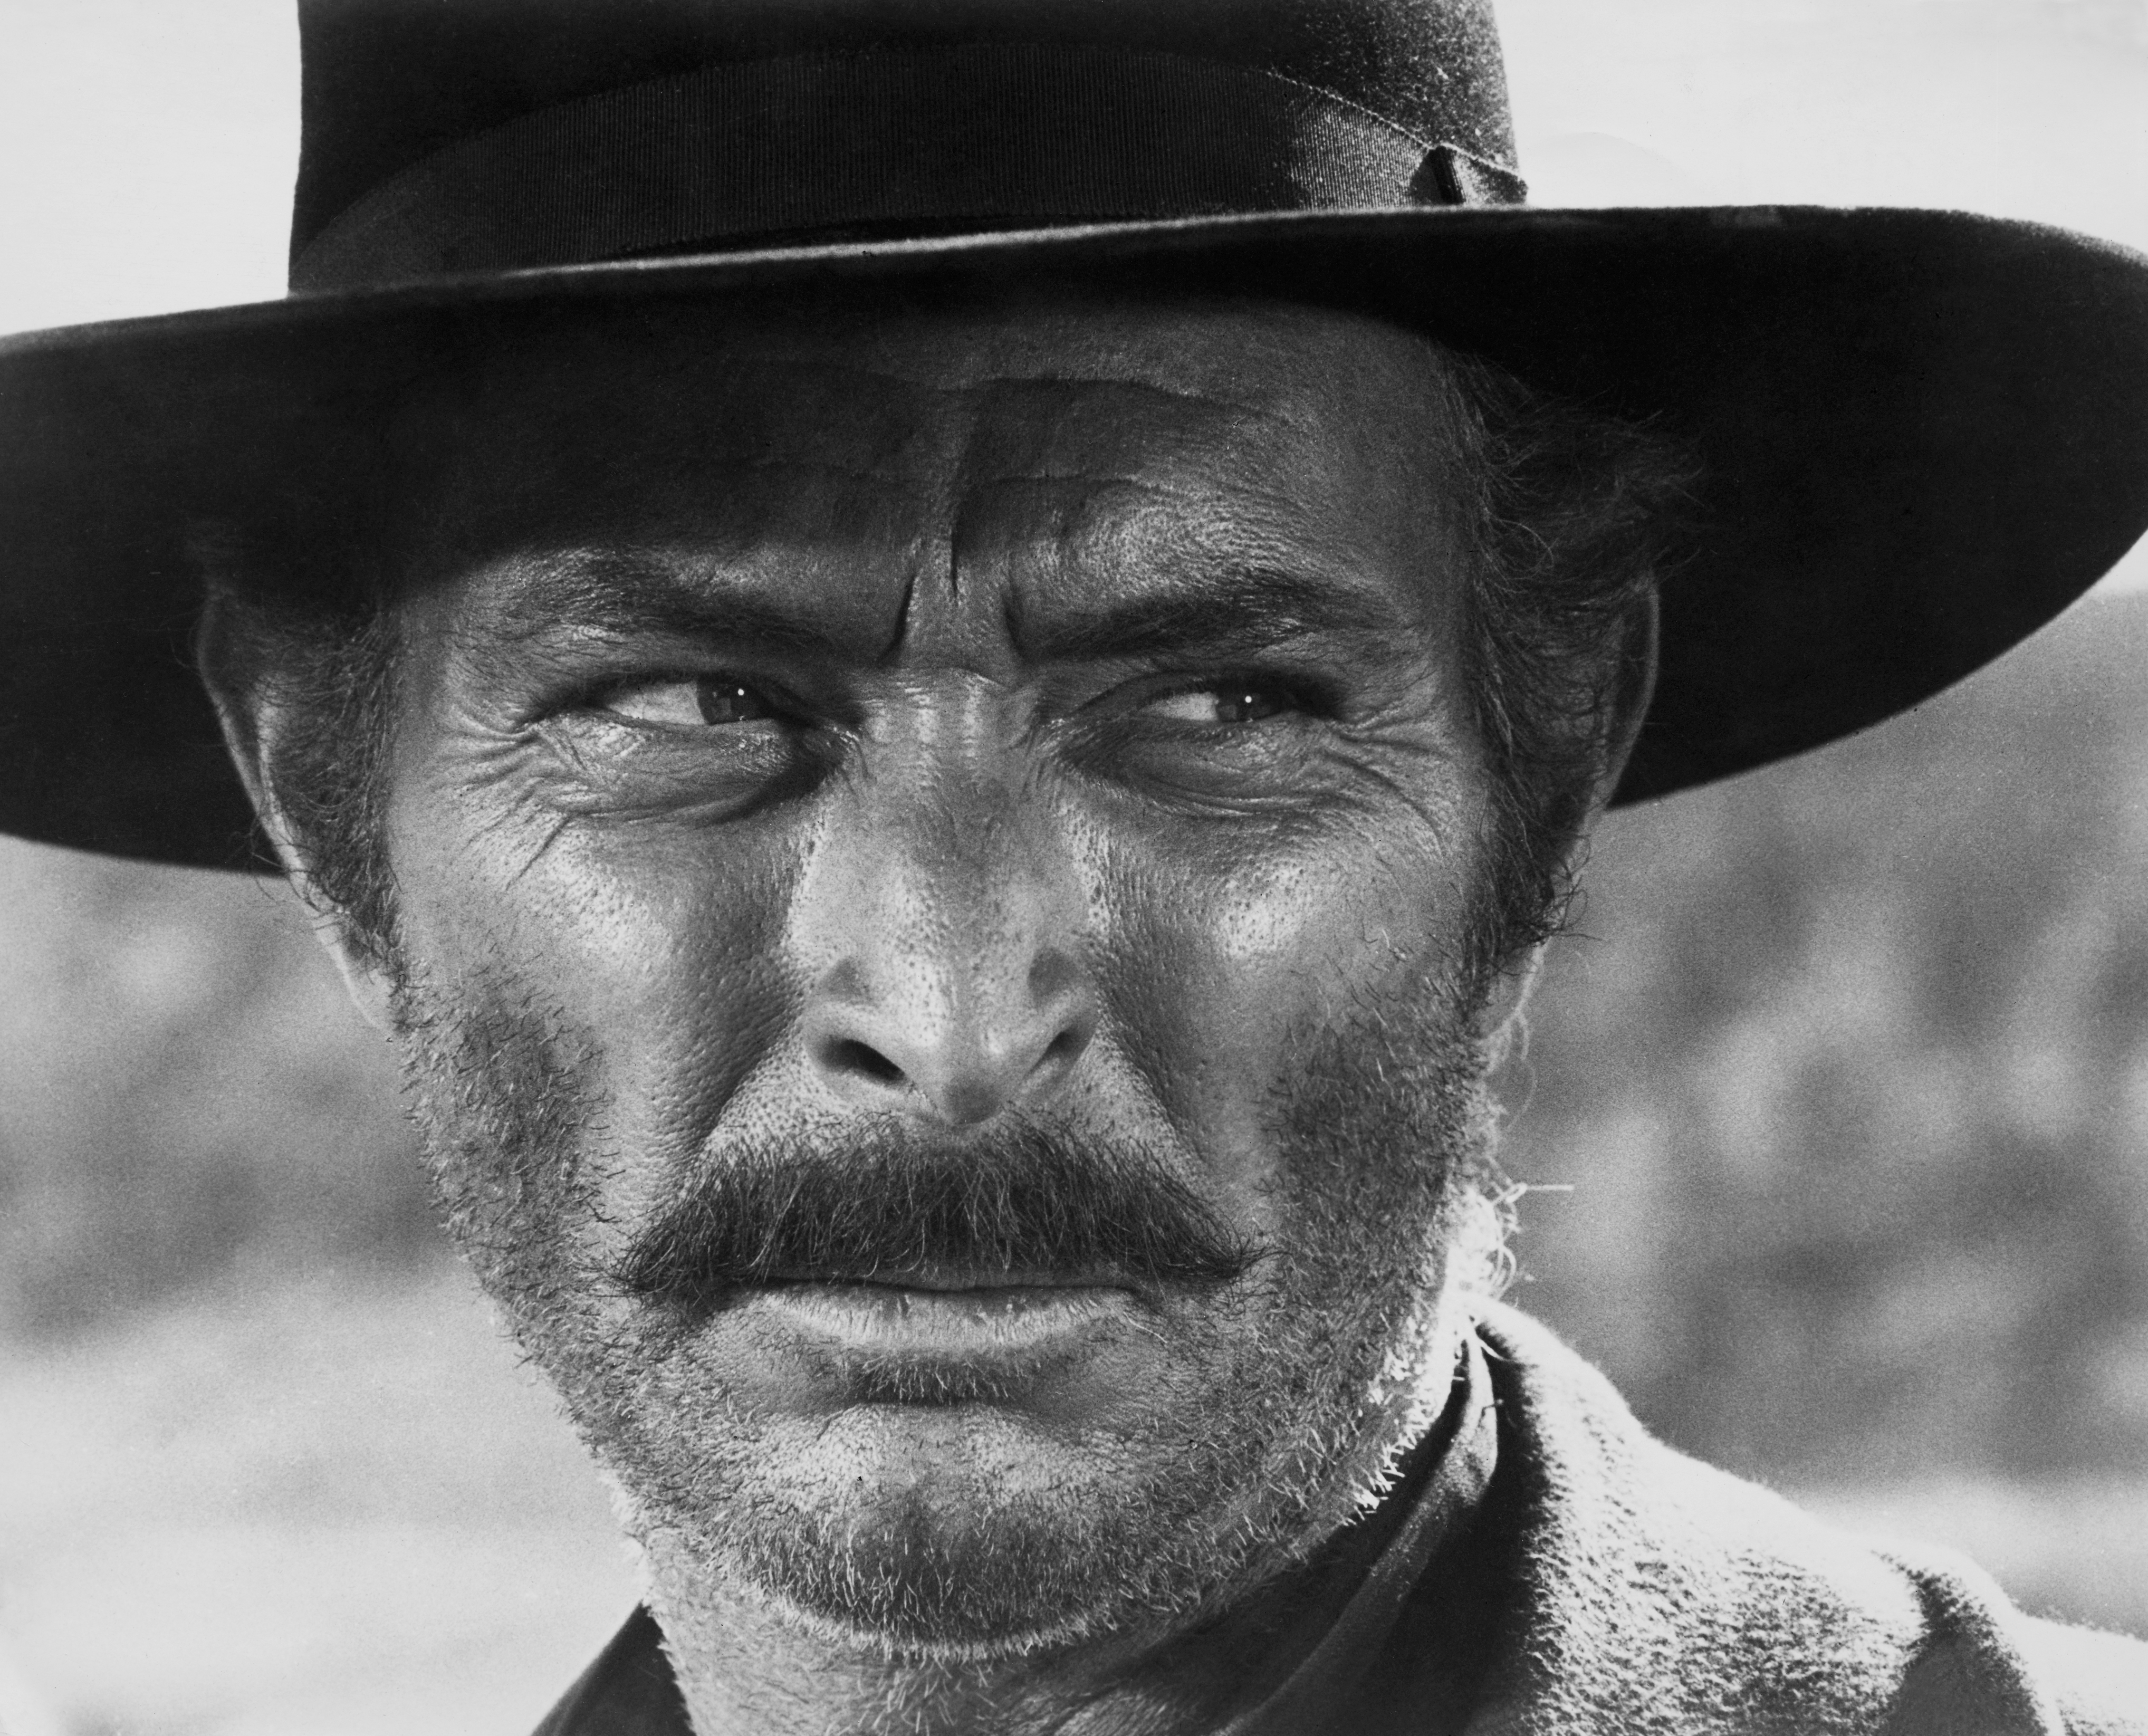 Lee Van Cleef in The Good, the Bad and the Ugly (1966)